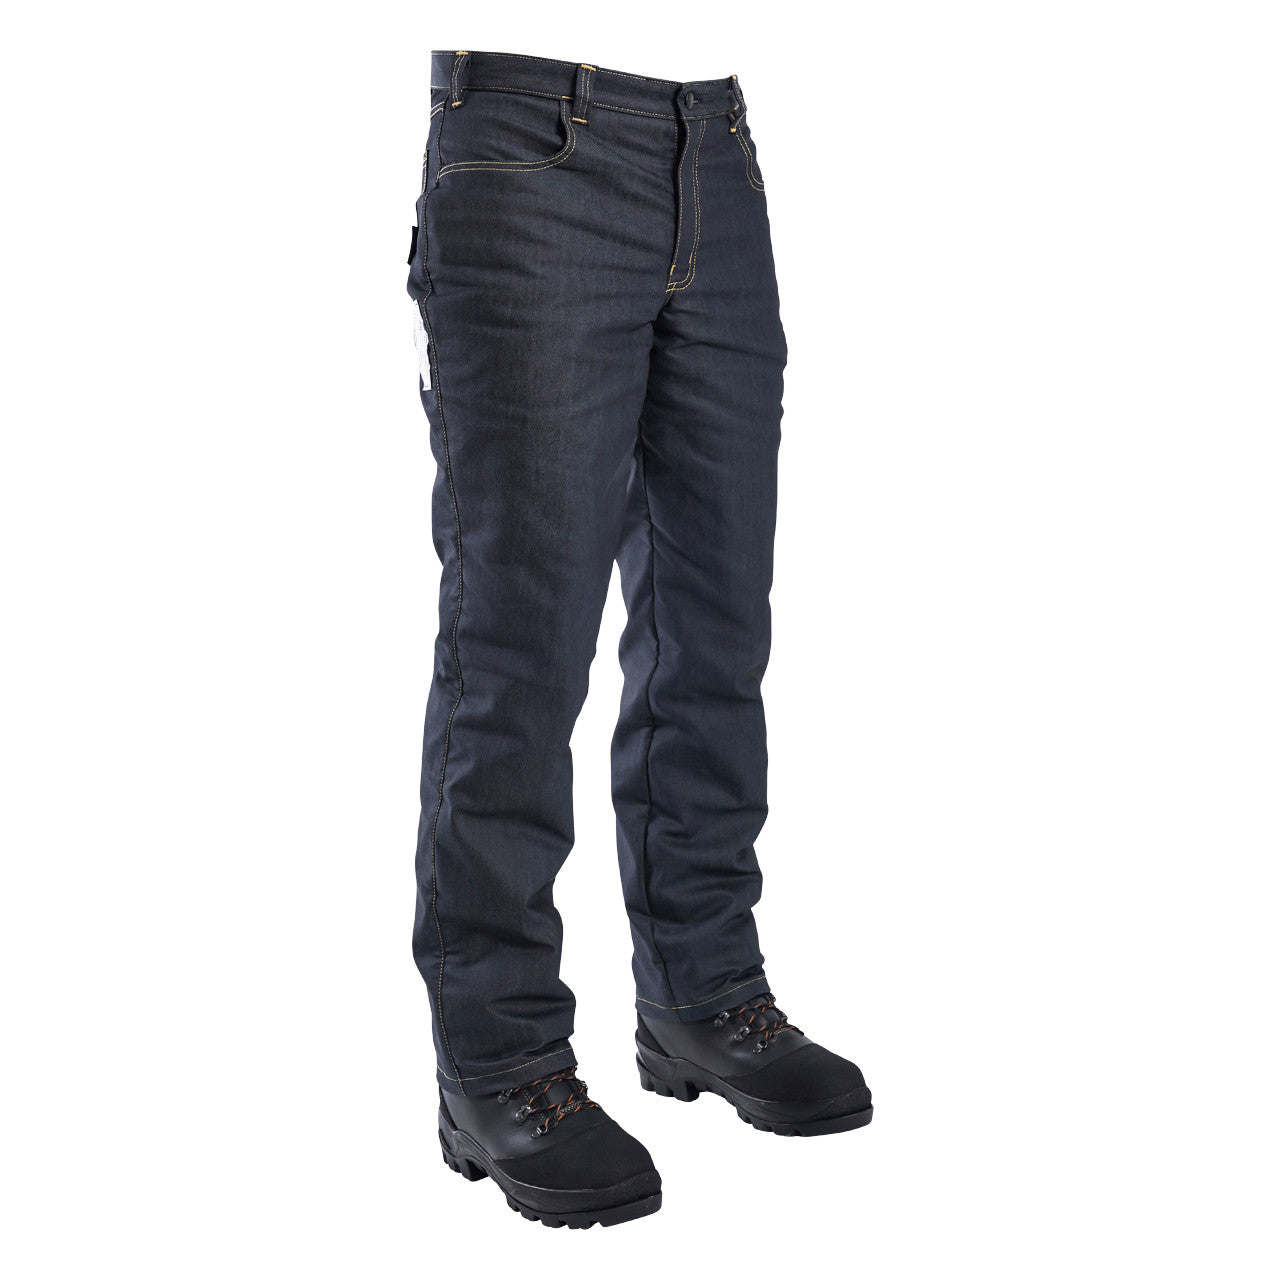 Clogger Spider Women's Climbing and Work Pants (Not Chainsaw Protective)